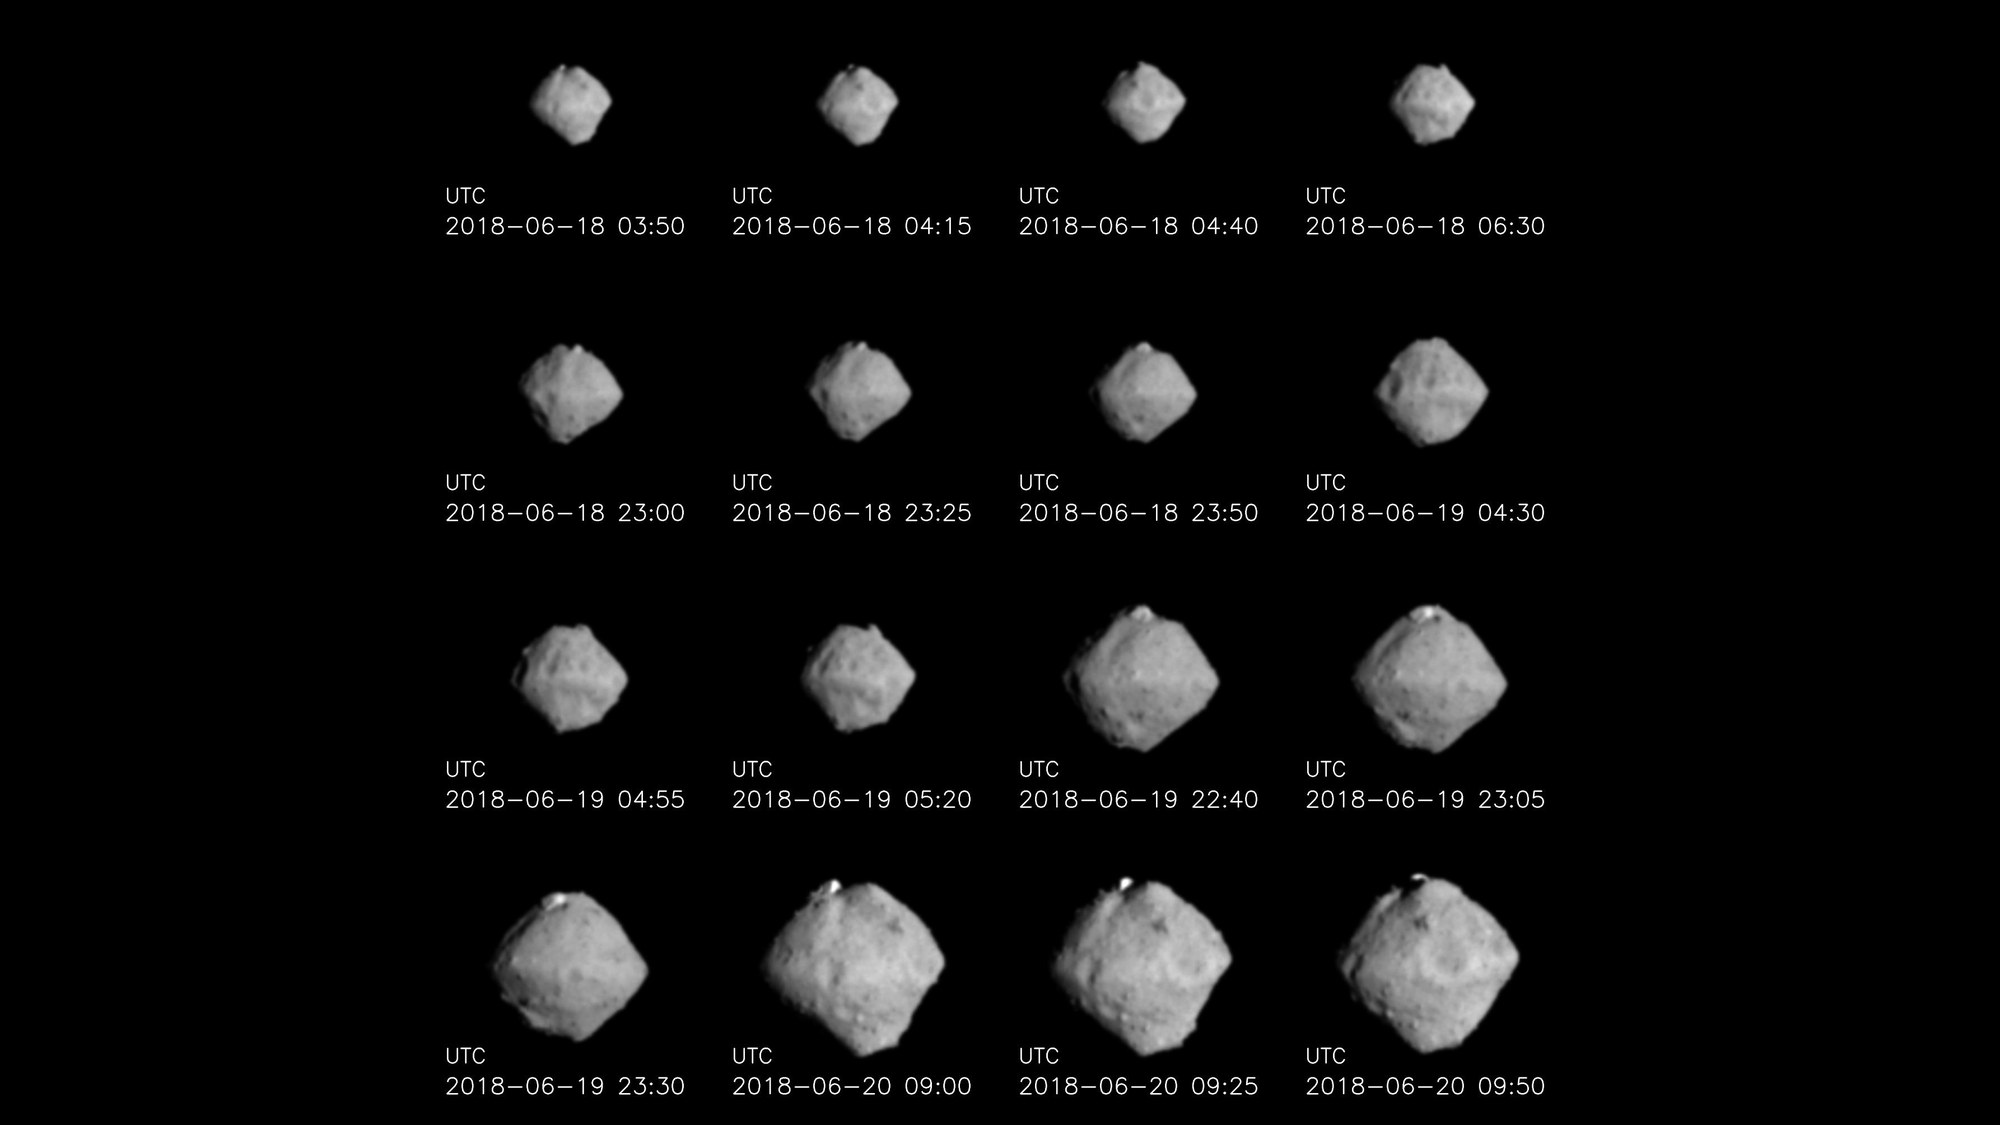 Images of the asteroid Ryugu during the approach